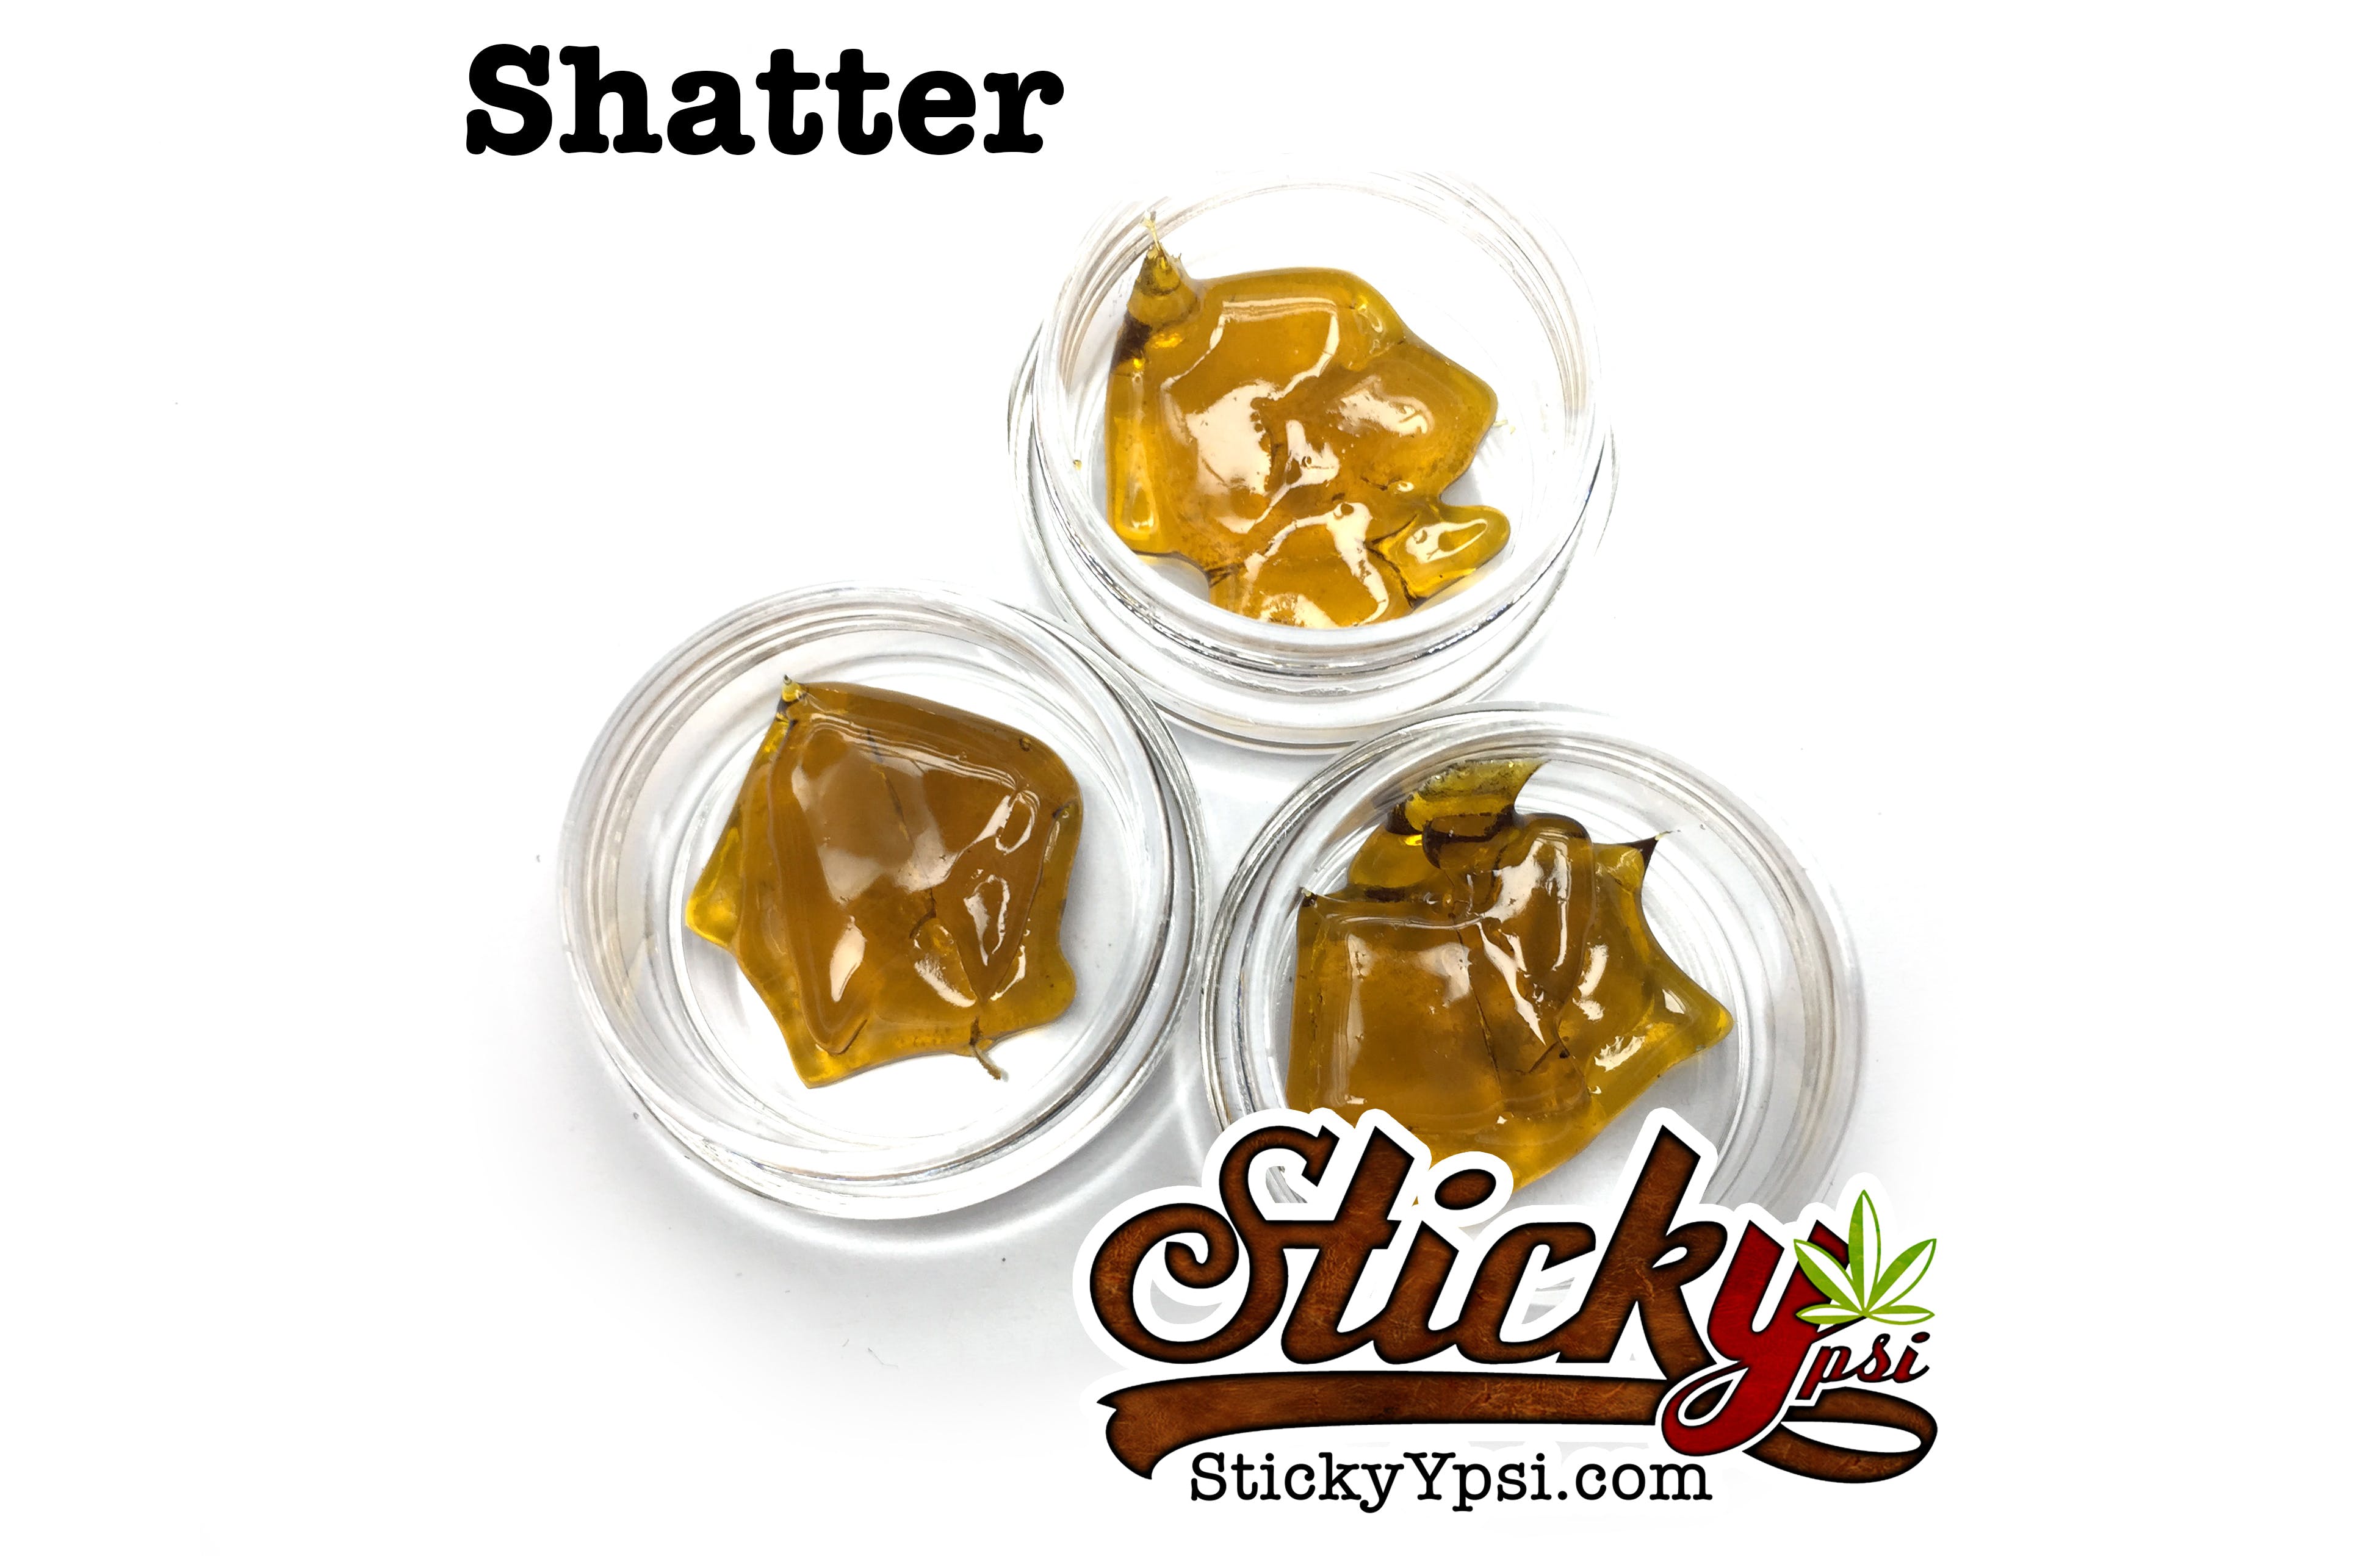 concentrate-ypsi-kush-shatter-5g